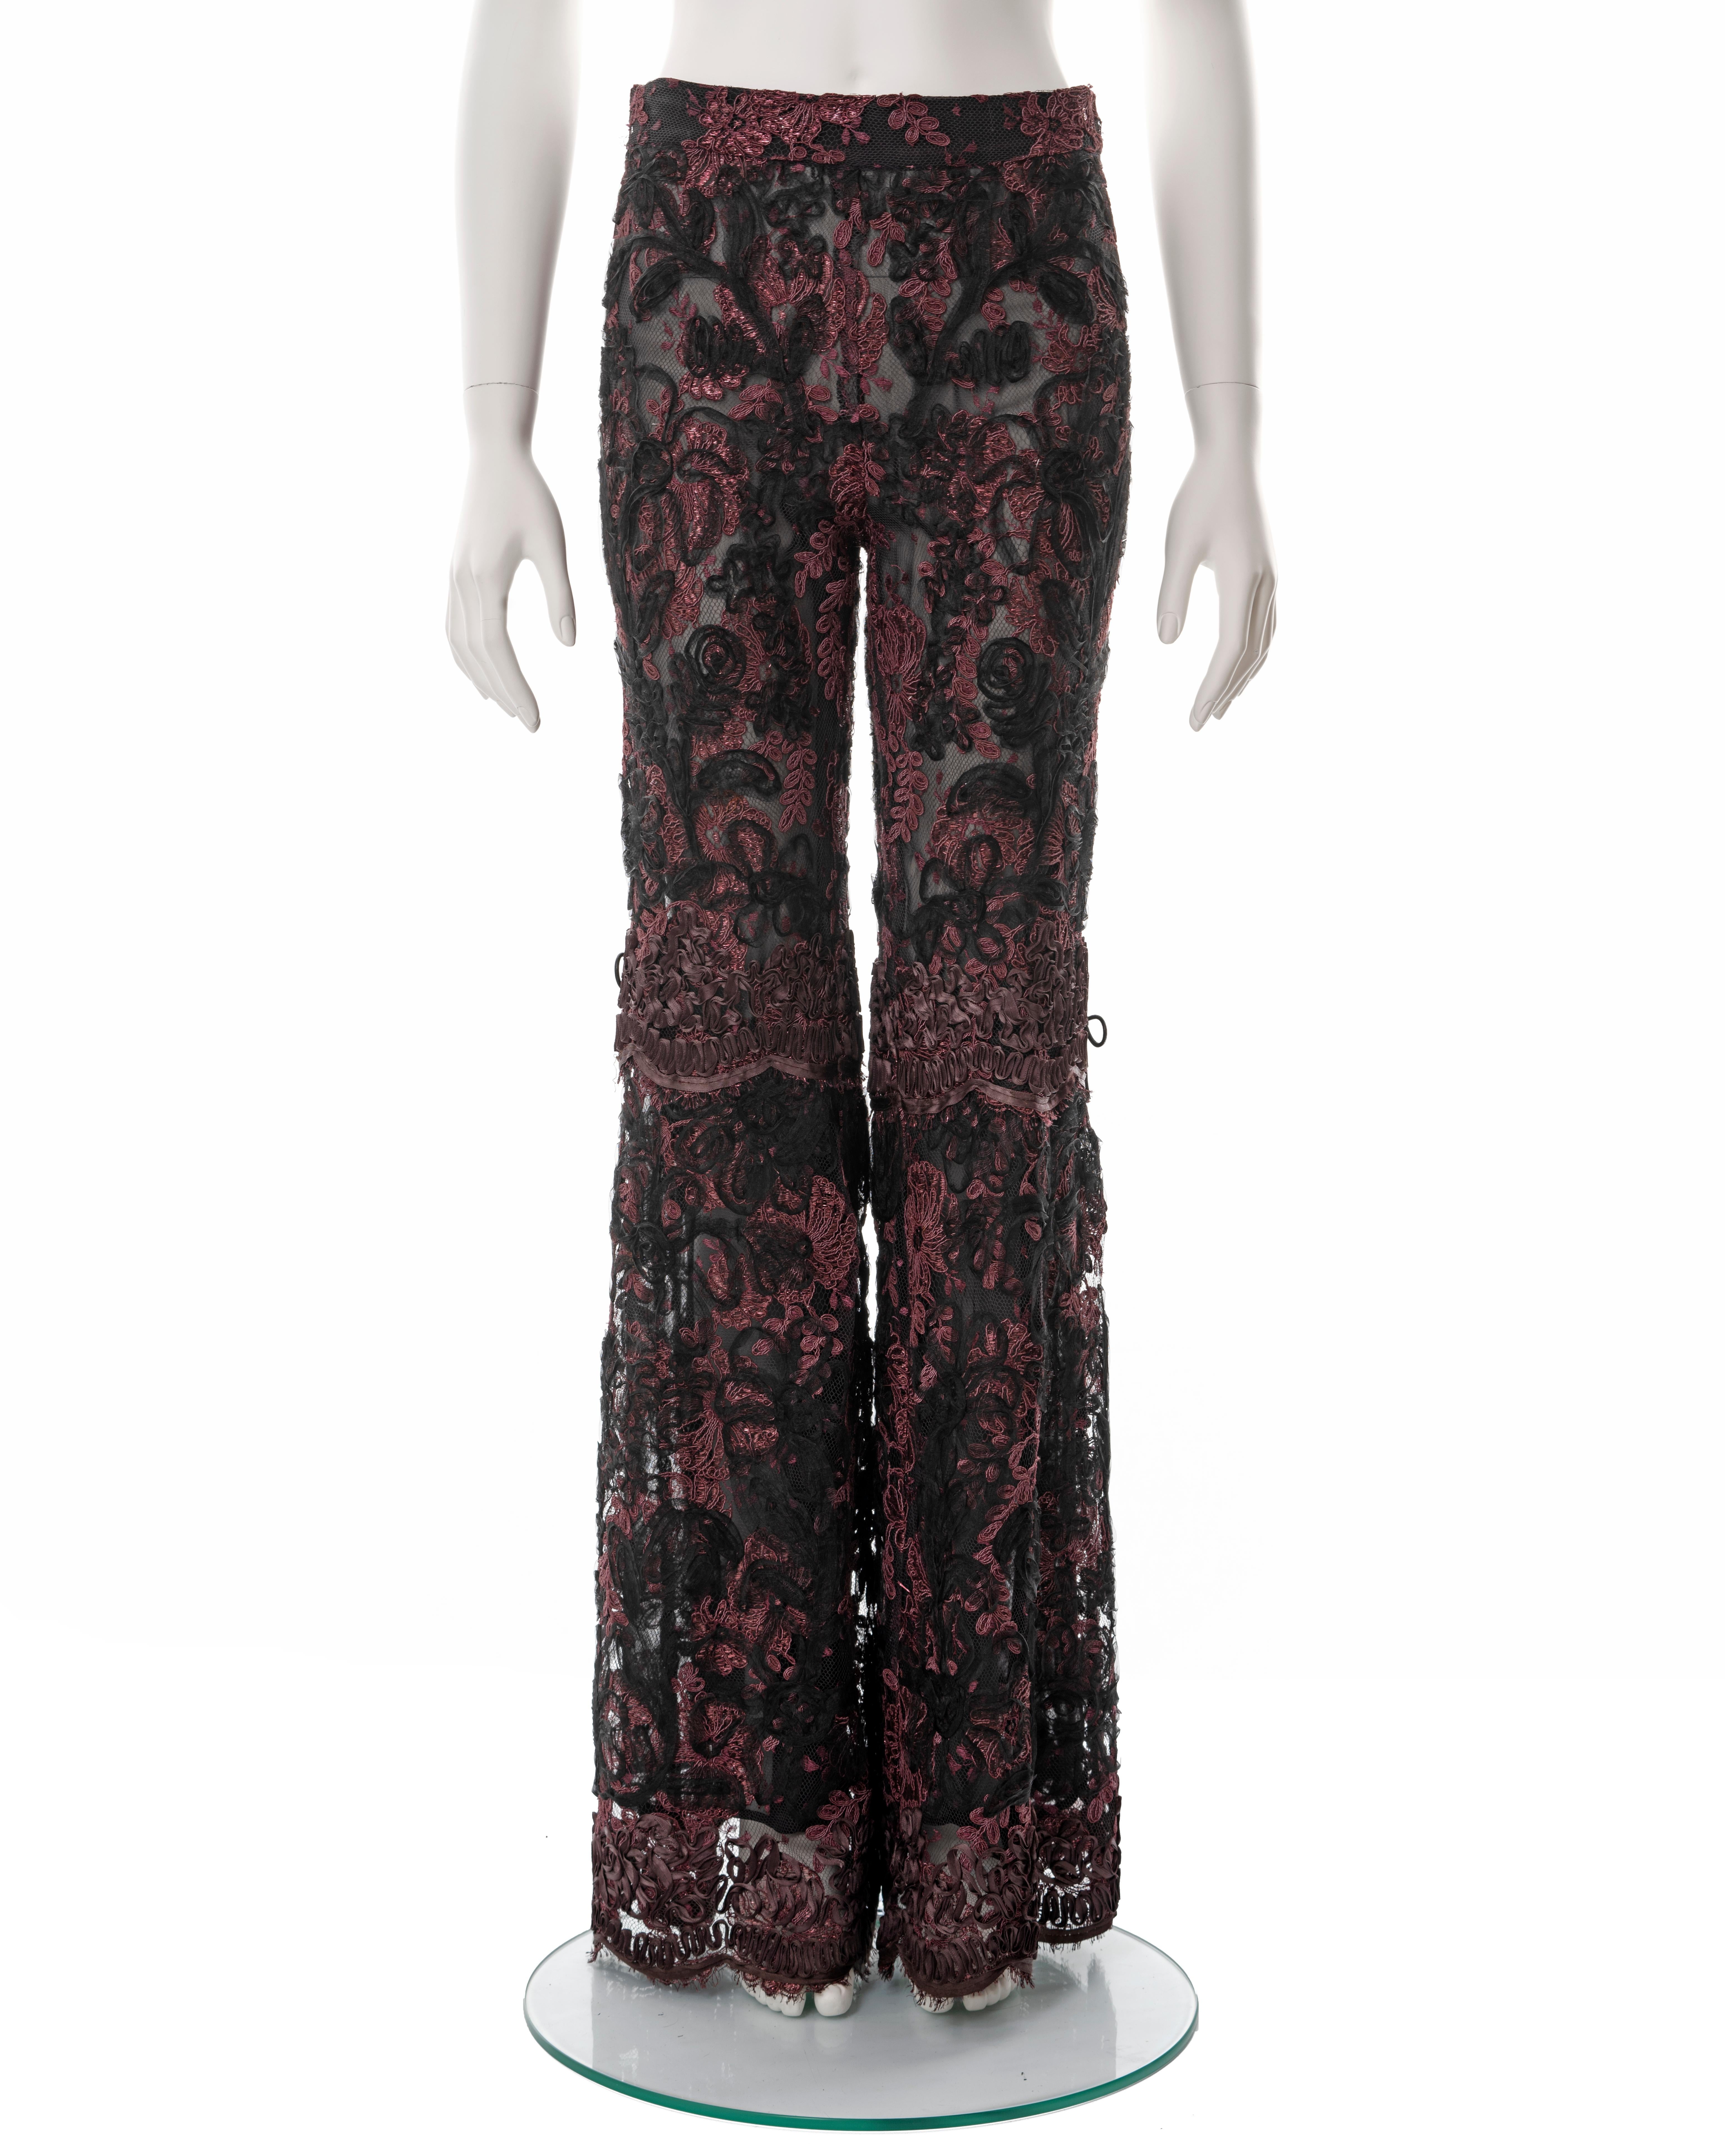 ▪ Gucci lace flared evening pants 
▪ Designed by Tom Ford
▪ Sold by One of a Kind Archive  
▪ Burgundy and black lamé floral lace
 ▪ Black ribbon embroidery 
▪ Leather bows at the knees  
▪ Silk chiffon lining  
▪ IT 46 - FR 42 - UK 14 - US 10 
▪